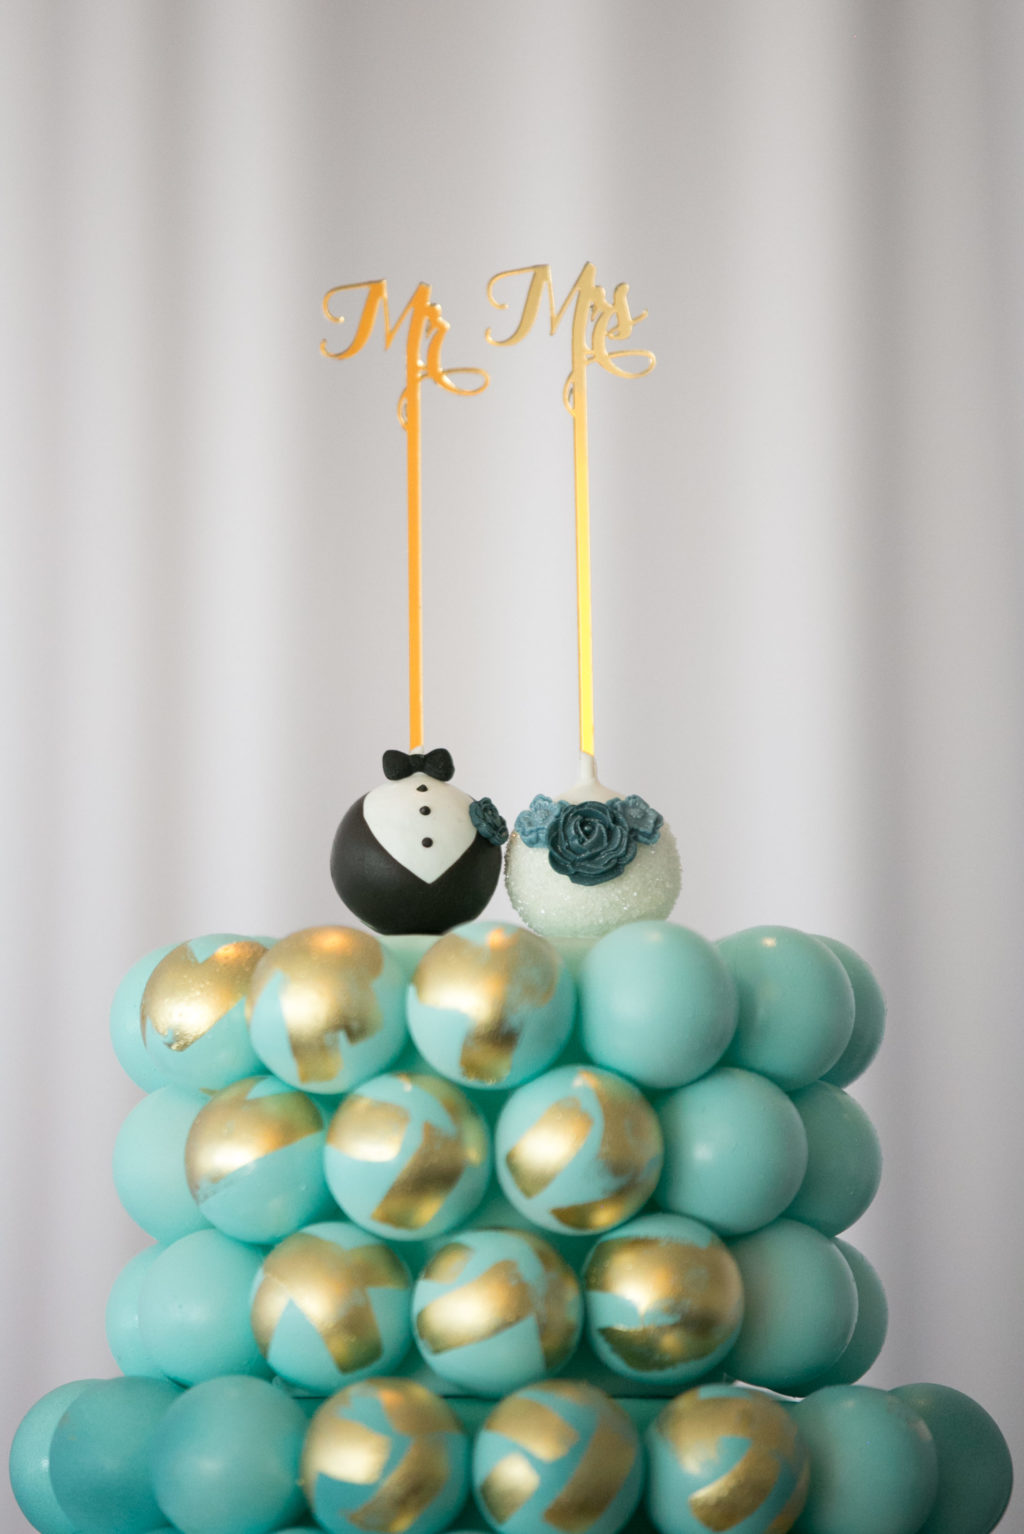 Unique Whimsical Ombre Blue with Gold Accent Three Tier Cake Pop Cake and Bride and Groom Cake Pop Topper | Wedding Cake Pops and Desserts Sweetly Dipped Confections | Wedding Photographer Carrie Wildes Photography | Tampa Wedding Planner John Campbell Weddings